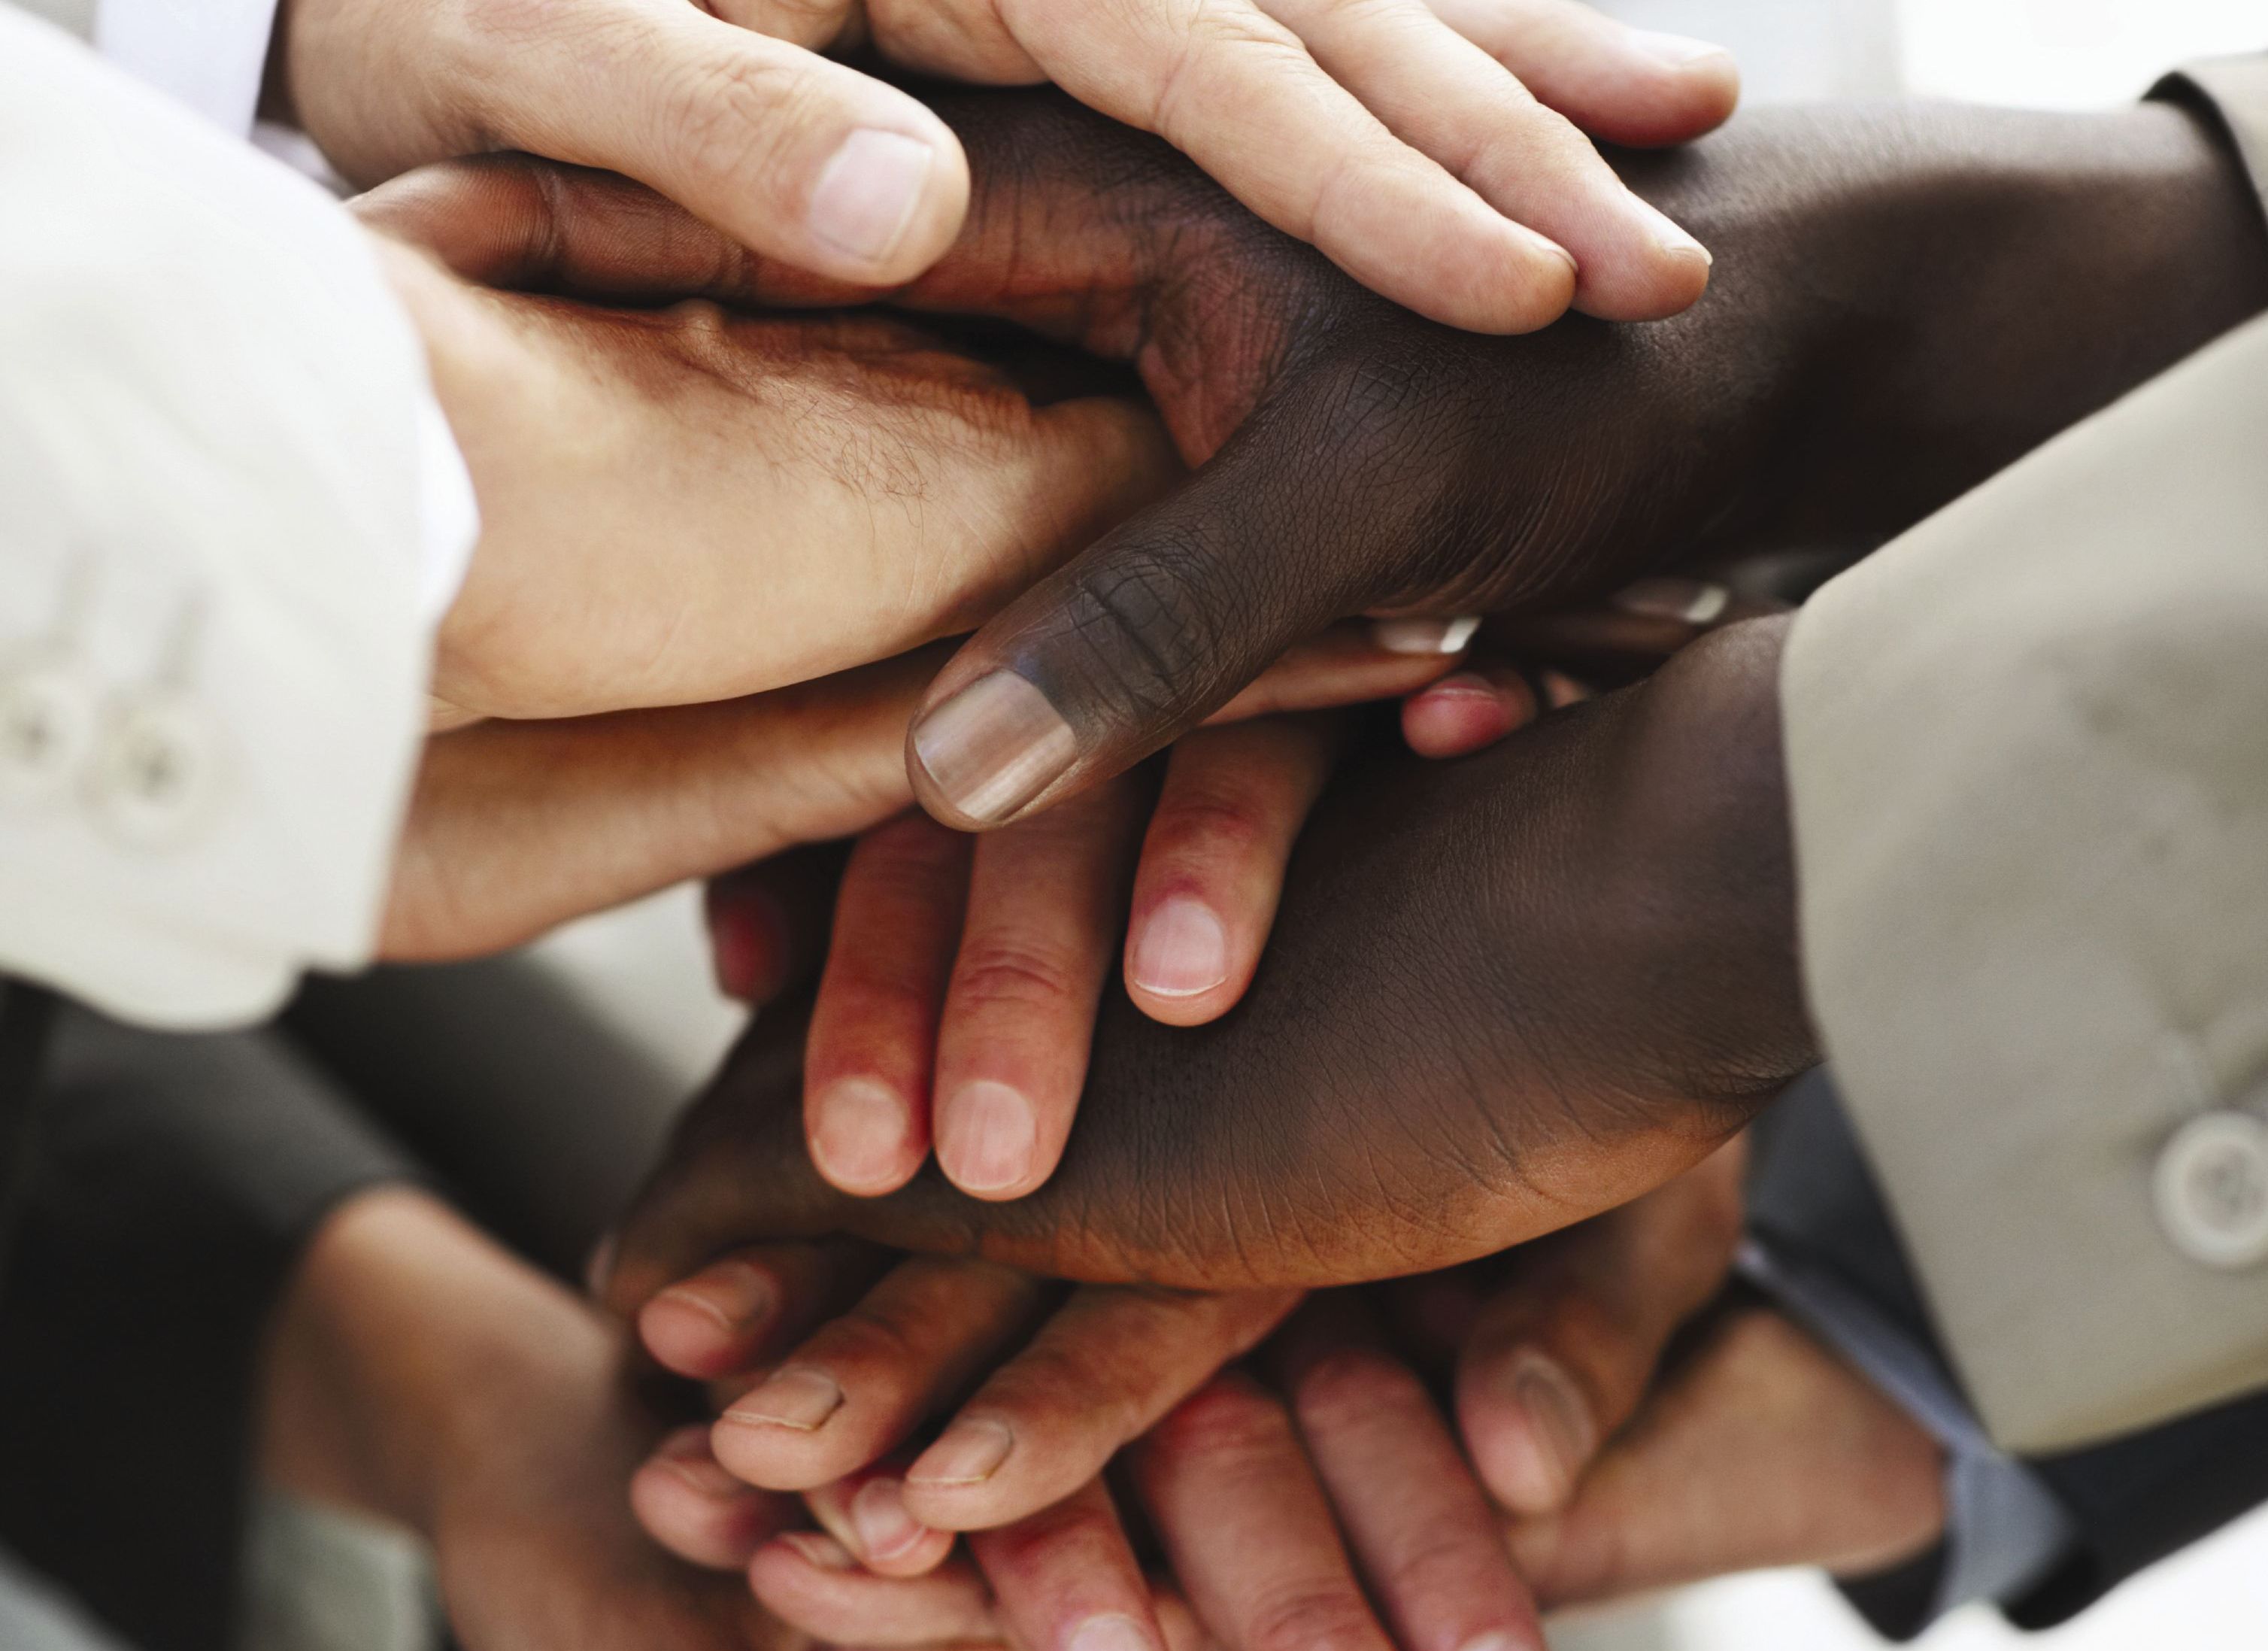 Sutton Turner on Why a Diverse Church Starts With a Diverse Staff